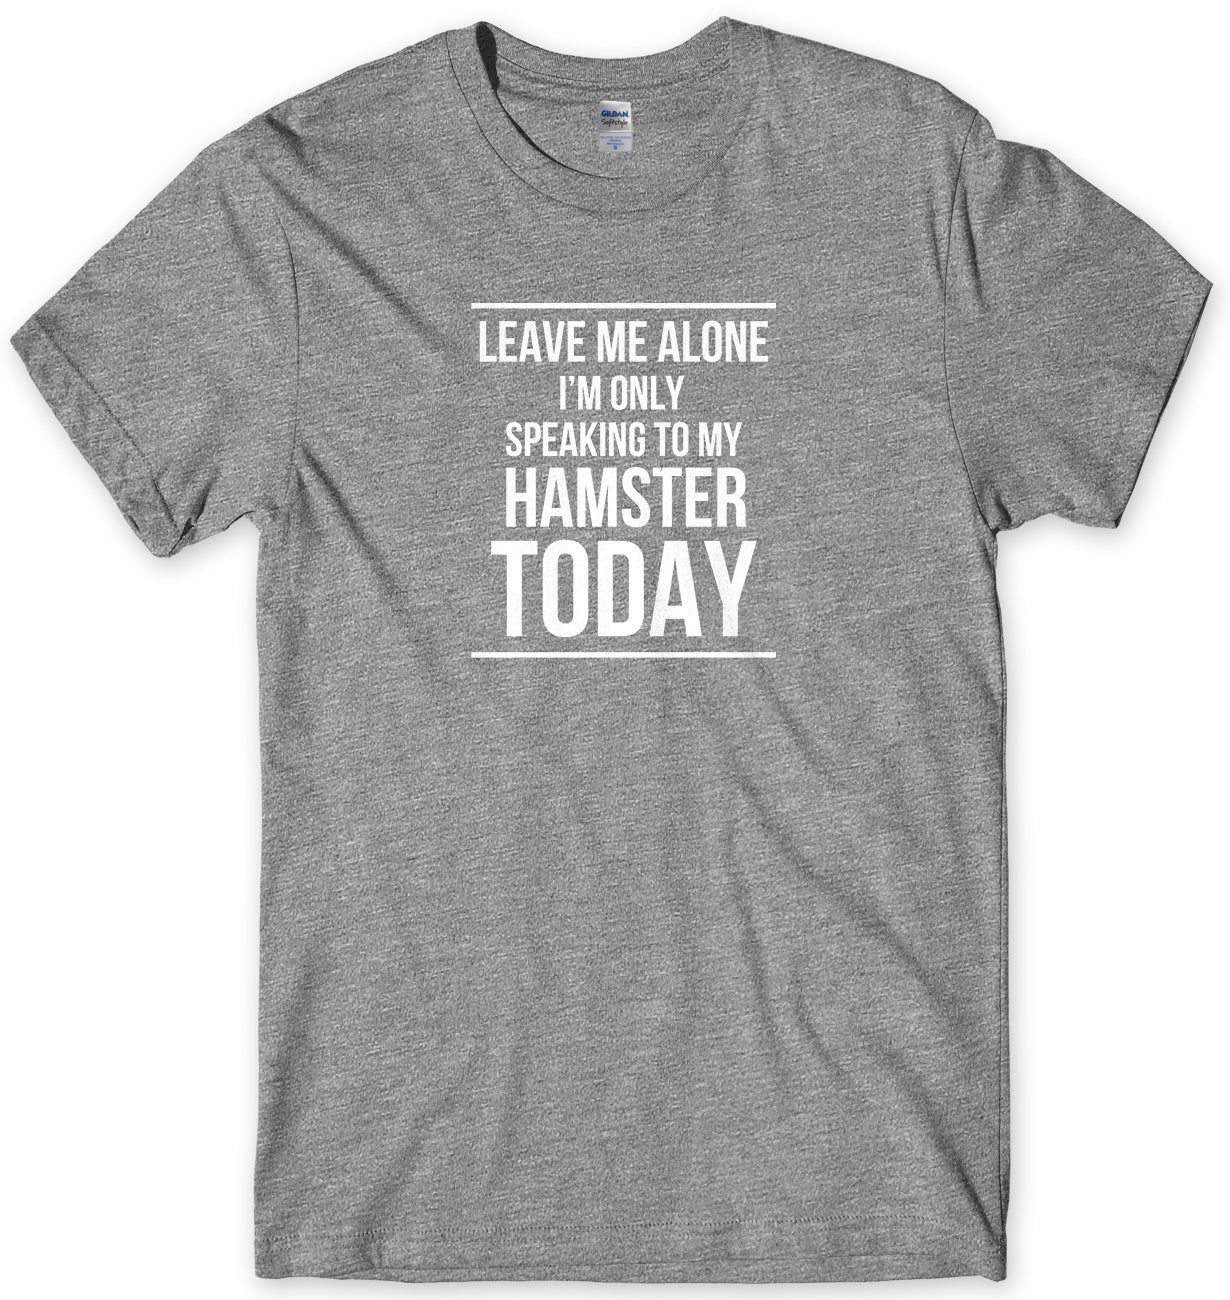 LEAVE ME ALONE I'M ONLY SPEAKING TO MY HAMSTER TODAY MENS FUNNY SLOGAN UNISEX T-SHIRT